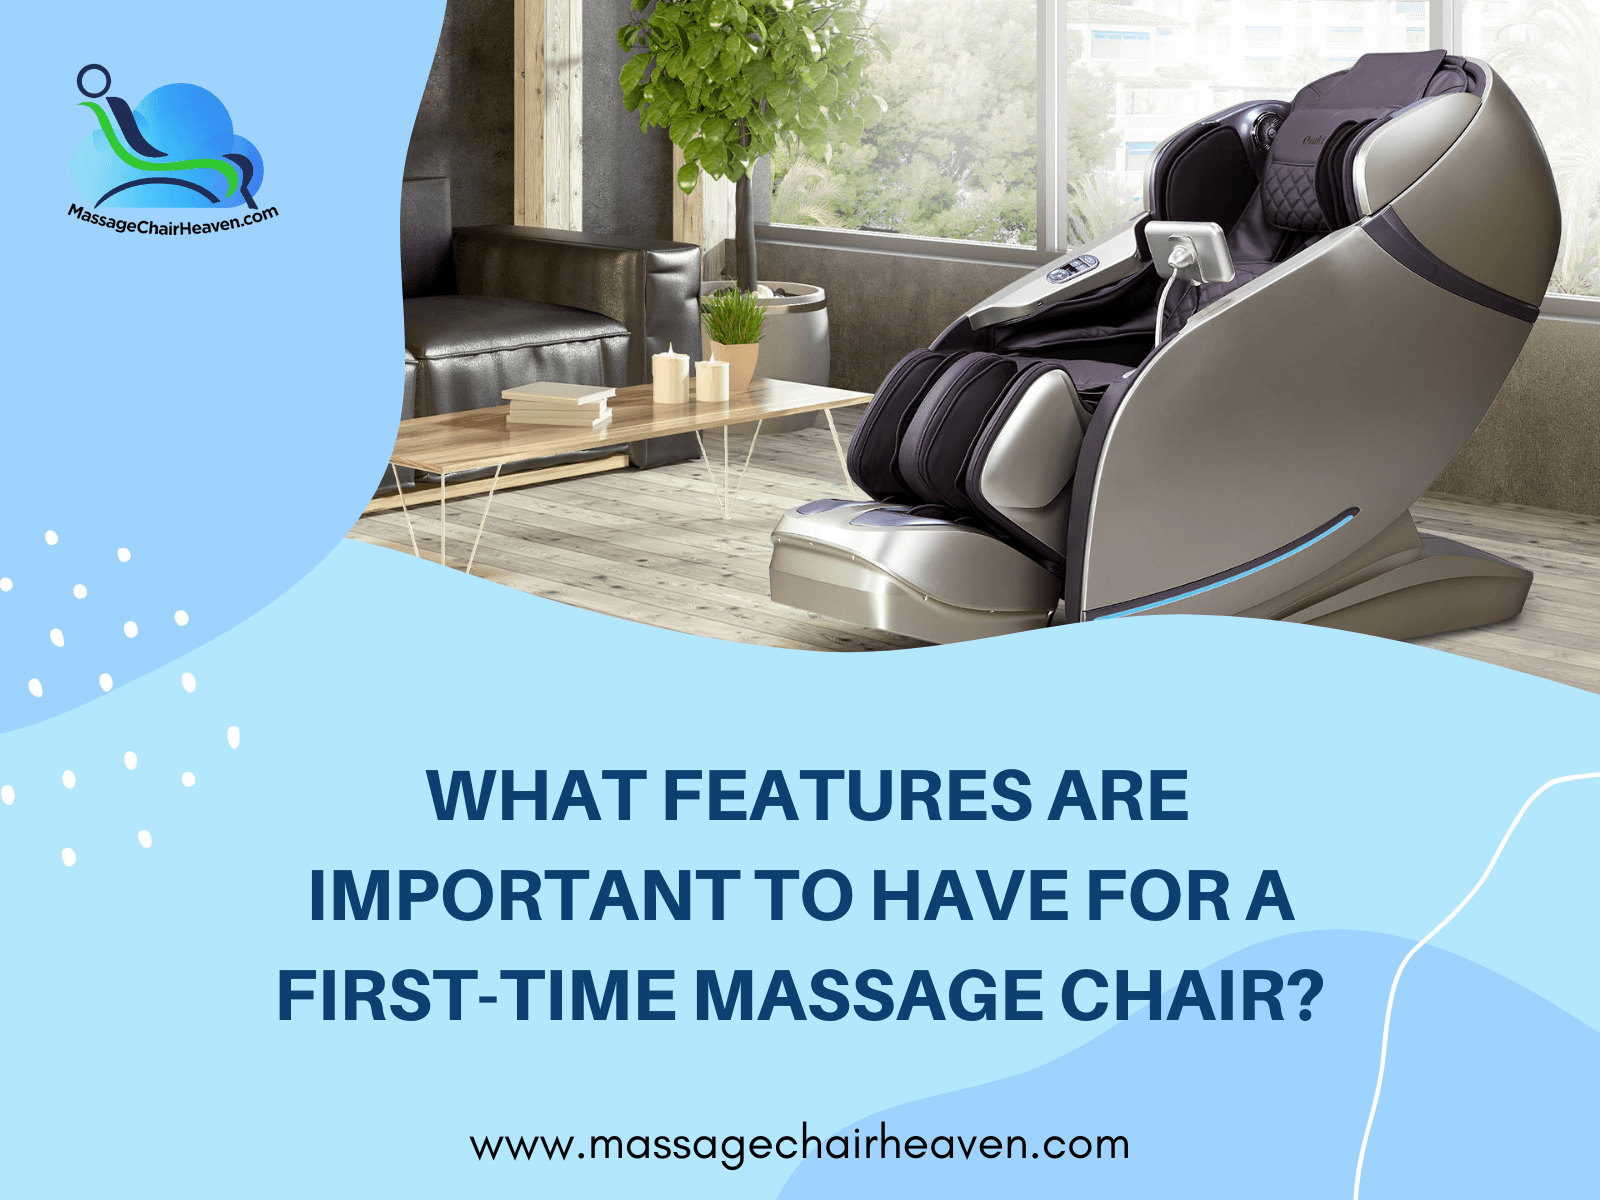 What Features Are Important to Have for A First-Time Massage Chair - Massage Chair Heaven